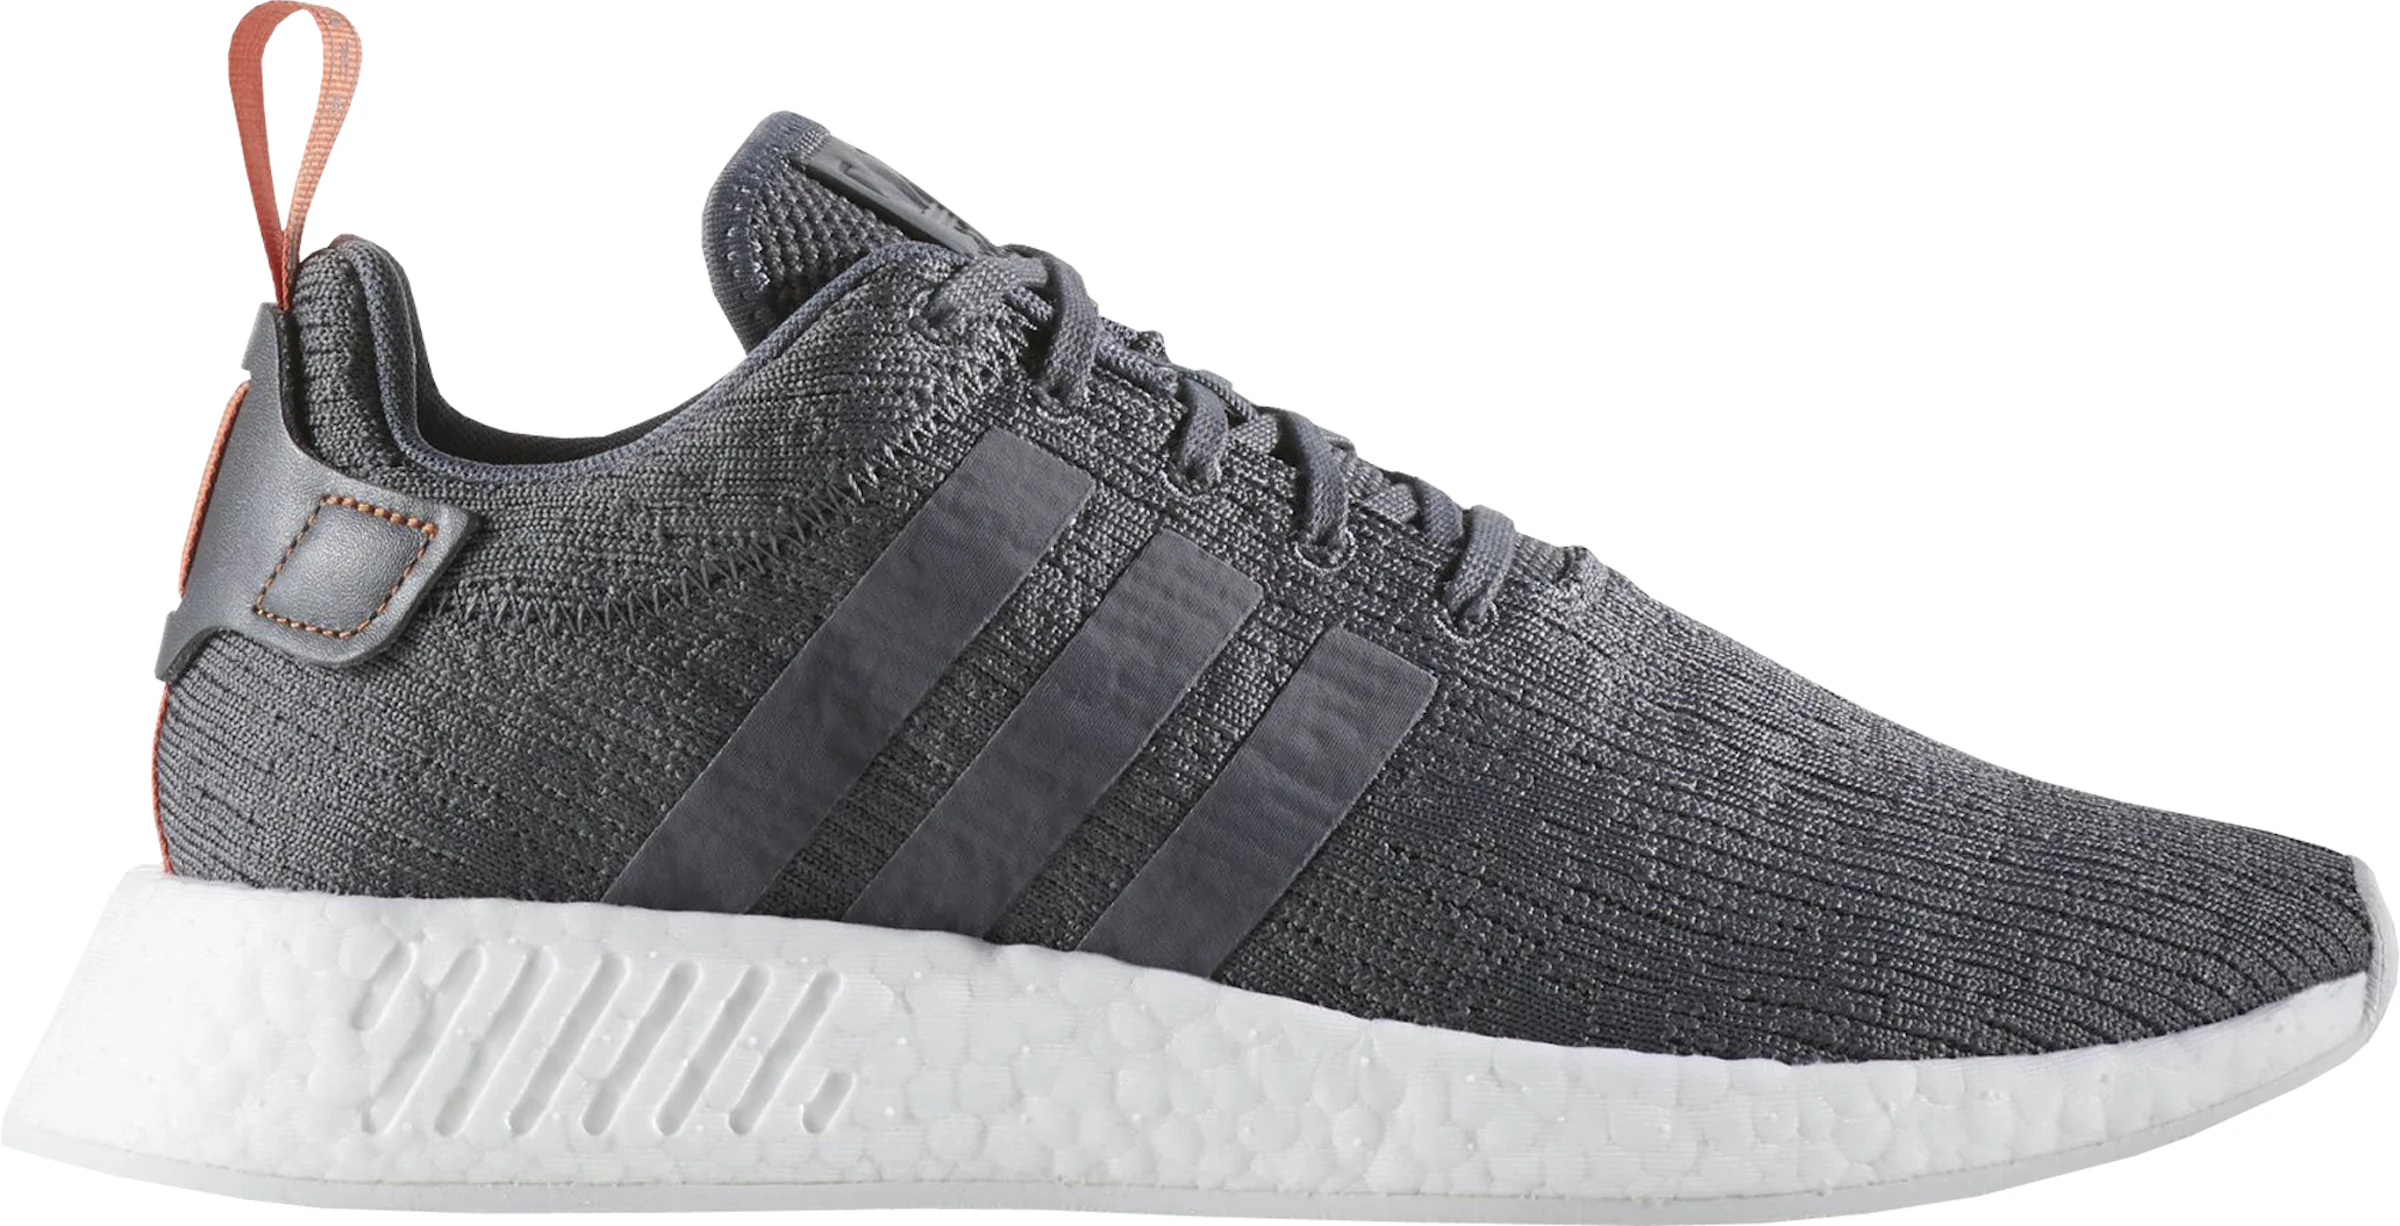 adidas NMD R2 Official Images and Release Date